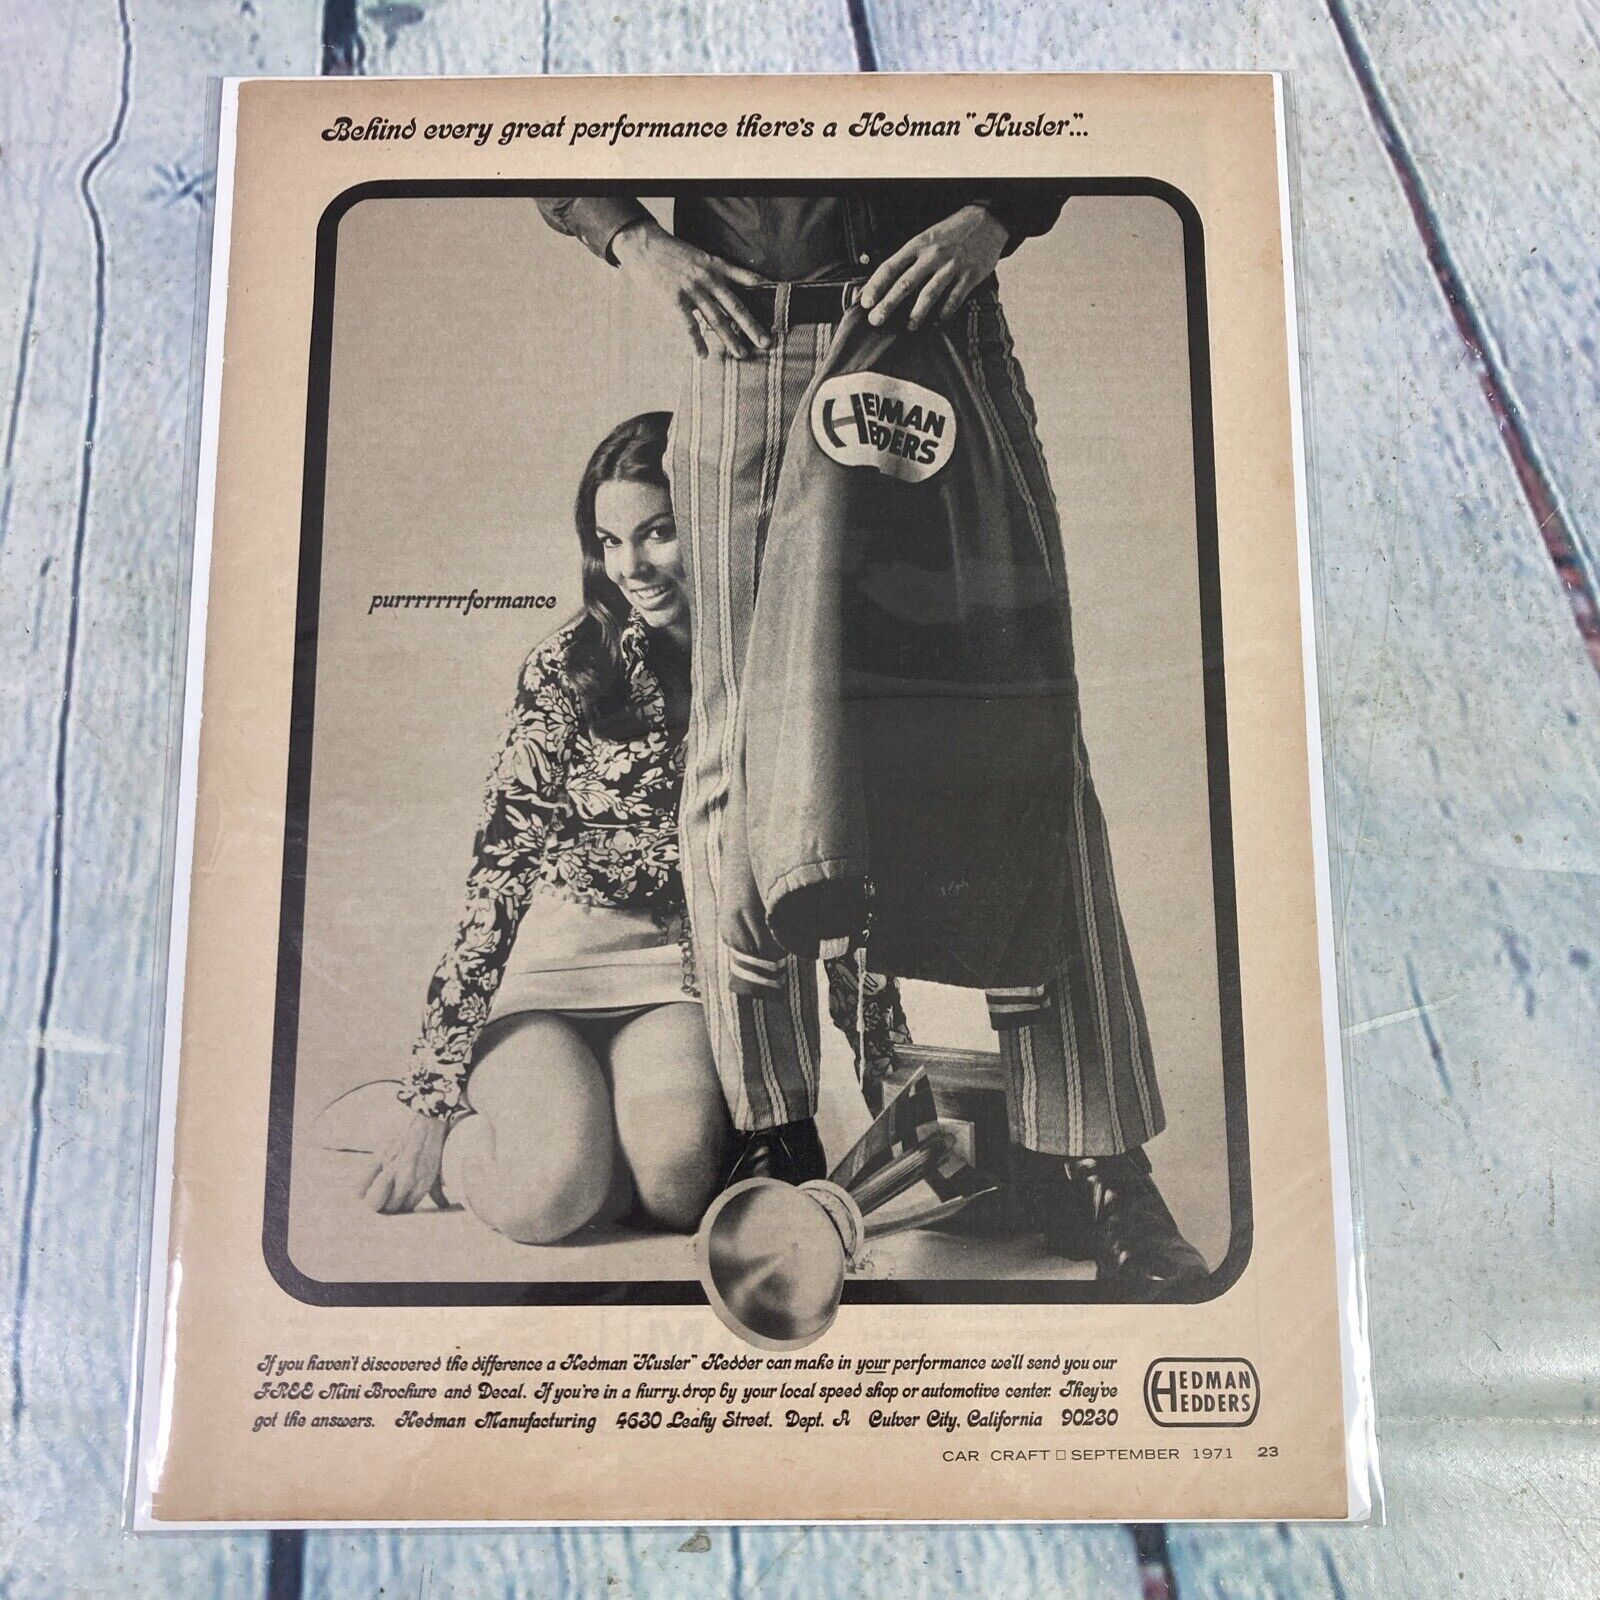 Vtg 1971 Print Ad Hedman Hedders Sexy Lady Hot Rod Car Parts Magazine Page Paper